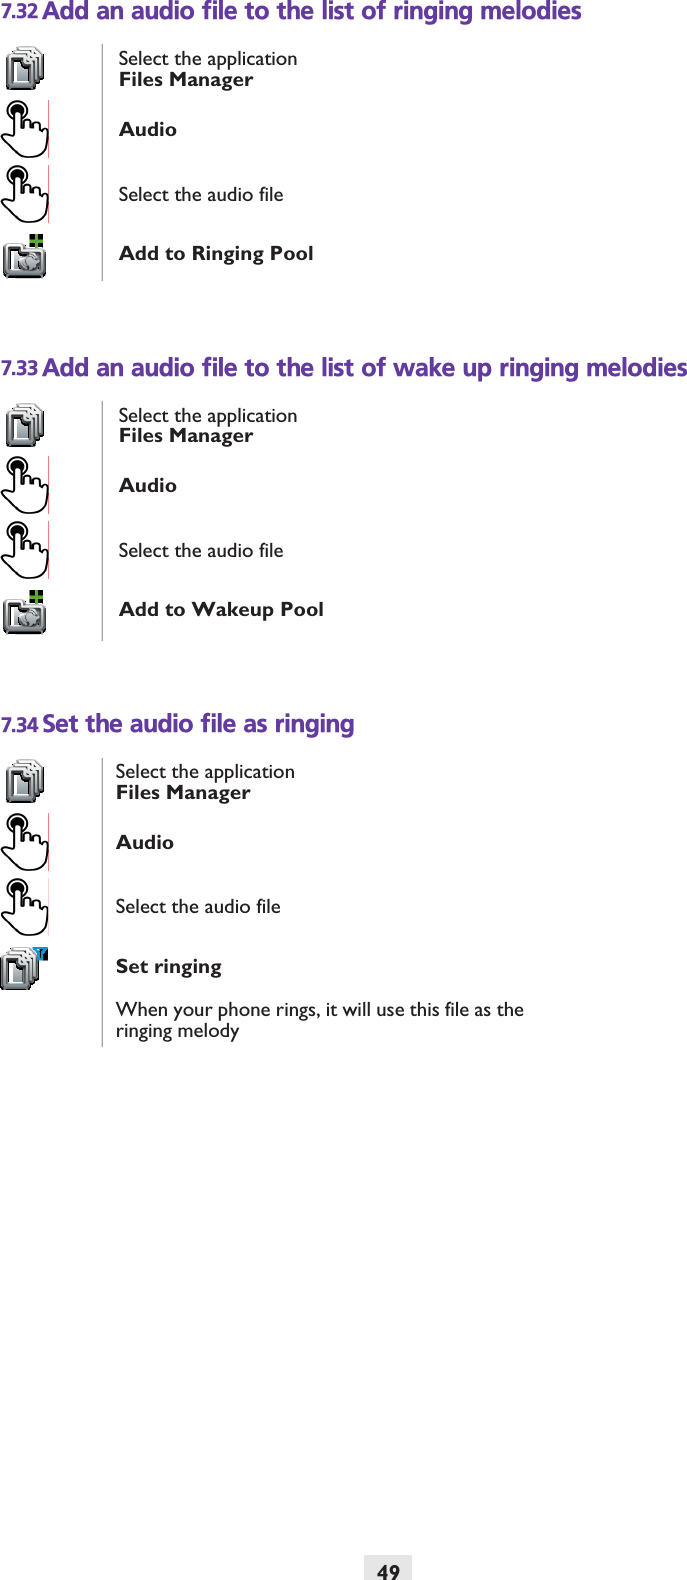 497.32 Add an audio file to the list of ringing melodies7.33 Add an audio file to the list of wake up ringing melodies7.34 Set the audio file as ringingSelect the applicationFiles ManagerAudioSelect the audio fileAdd to Ringing PoolSelect the applicationFiles ManagerAudioSelect the audio fileAdd to Wakeup PoolSelect the applicationFiles ManagerAudioSelect the audio fileSet ringingWhen your phone rings, it will use this file as the ringing melody